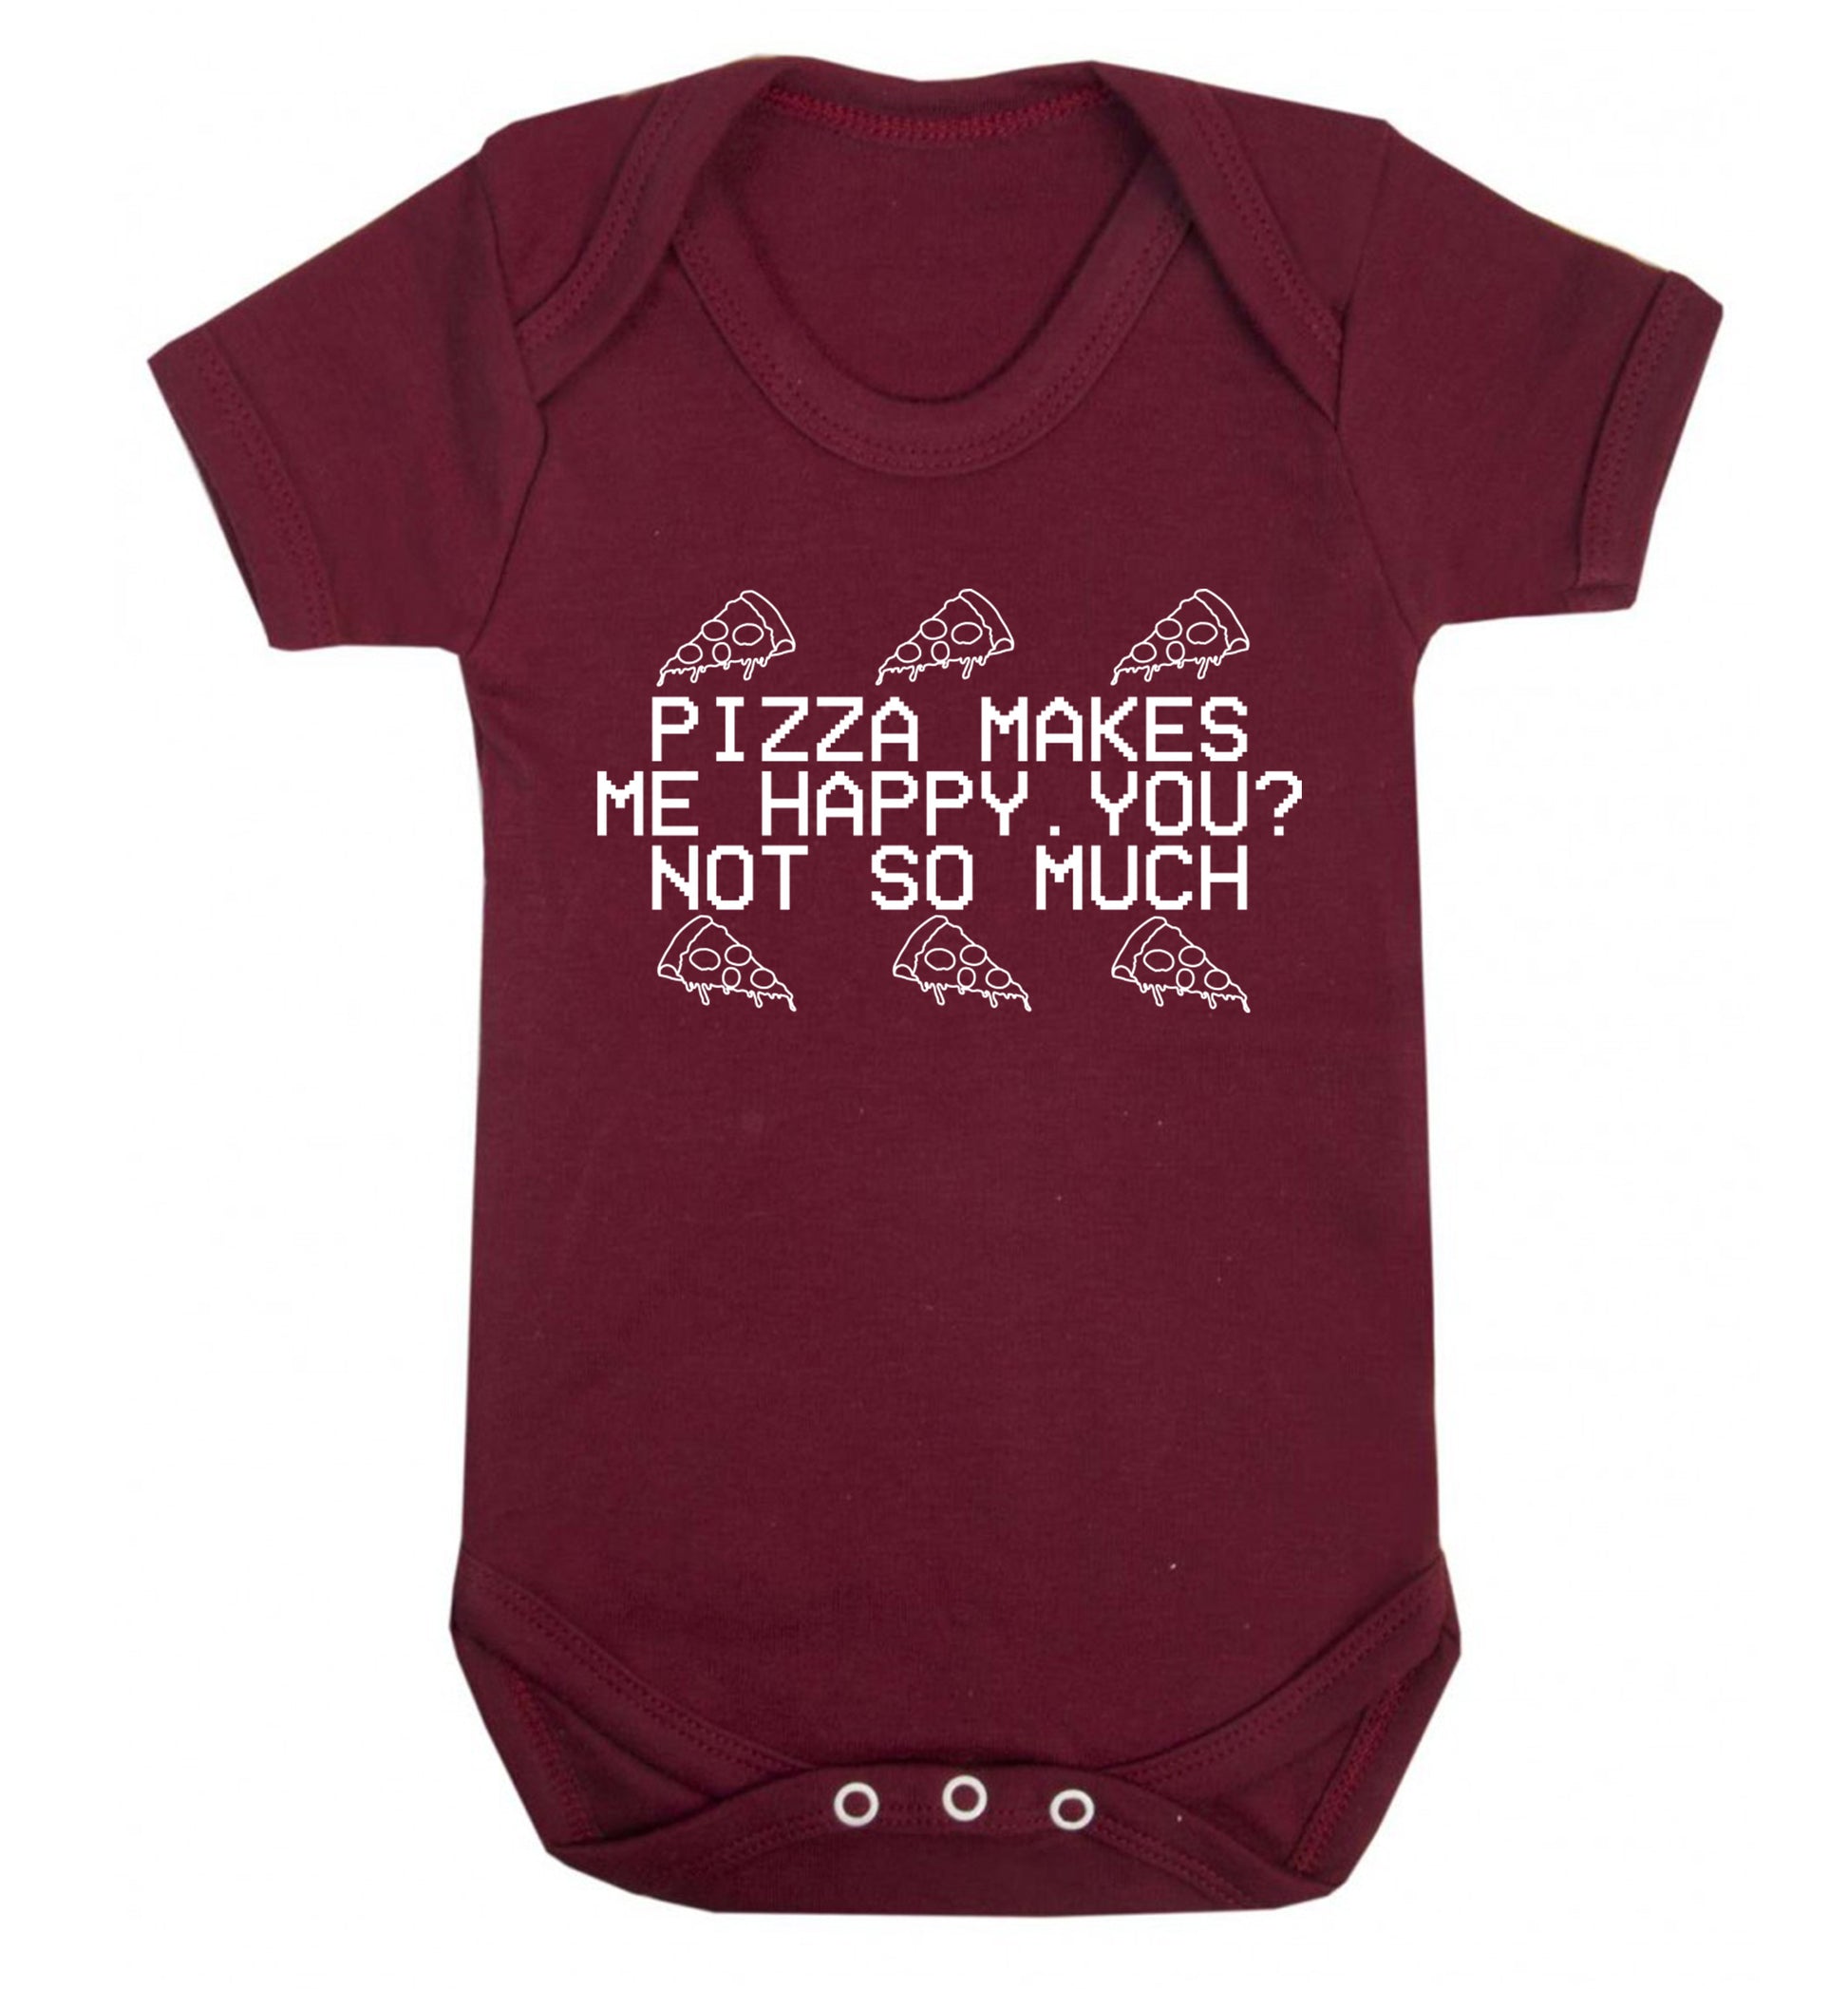 Pizza makes me happy, You? Not so much Baby Vest maroon 18-24 months